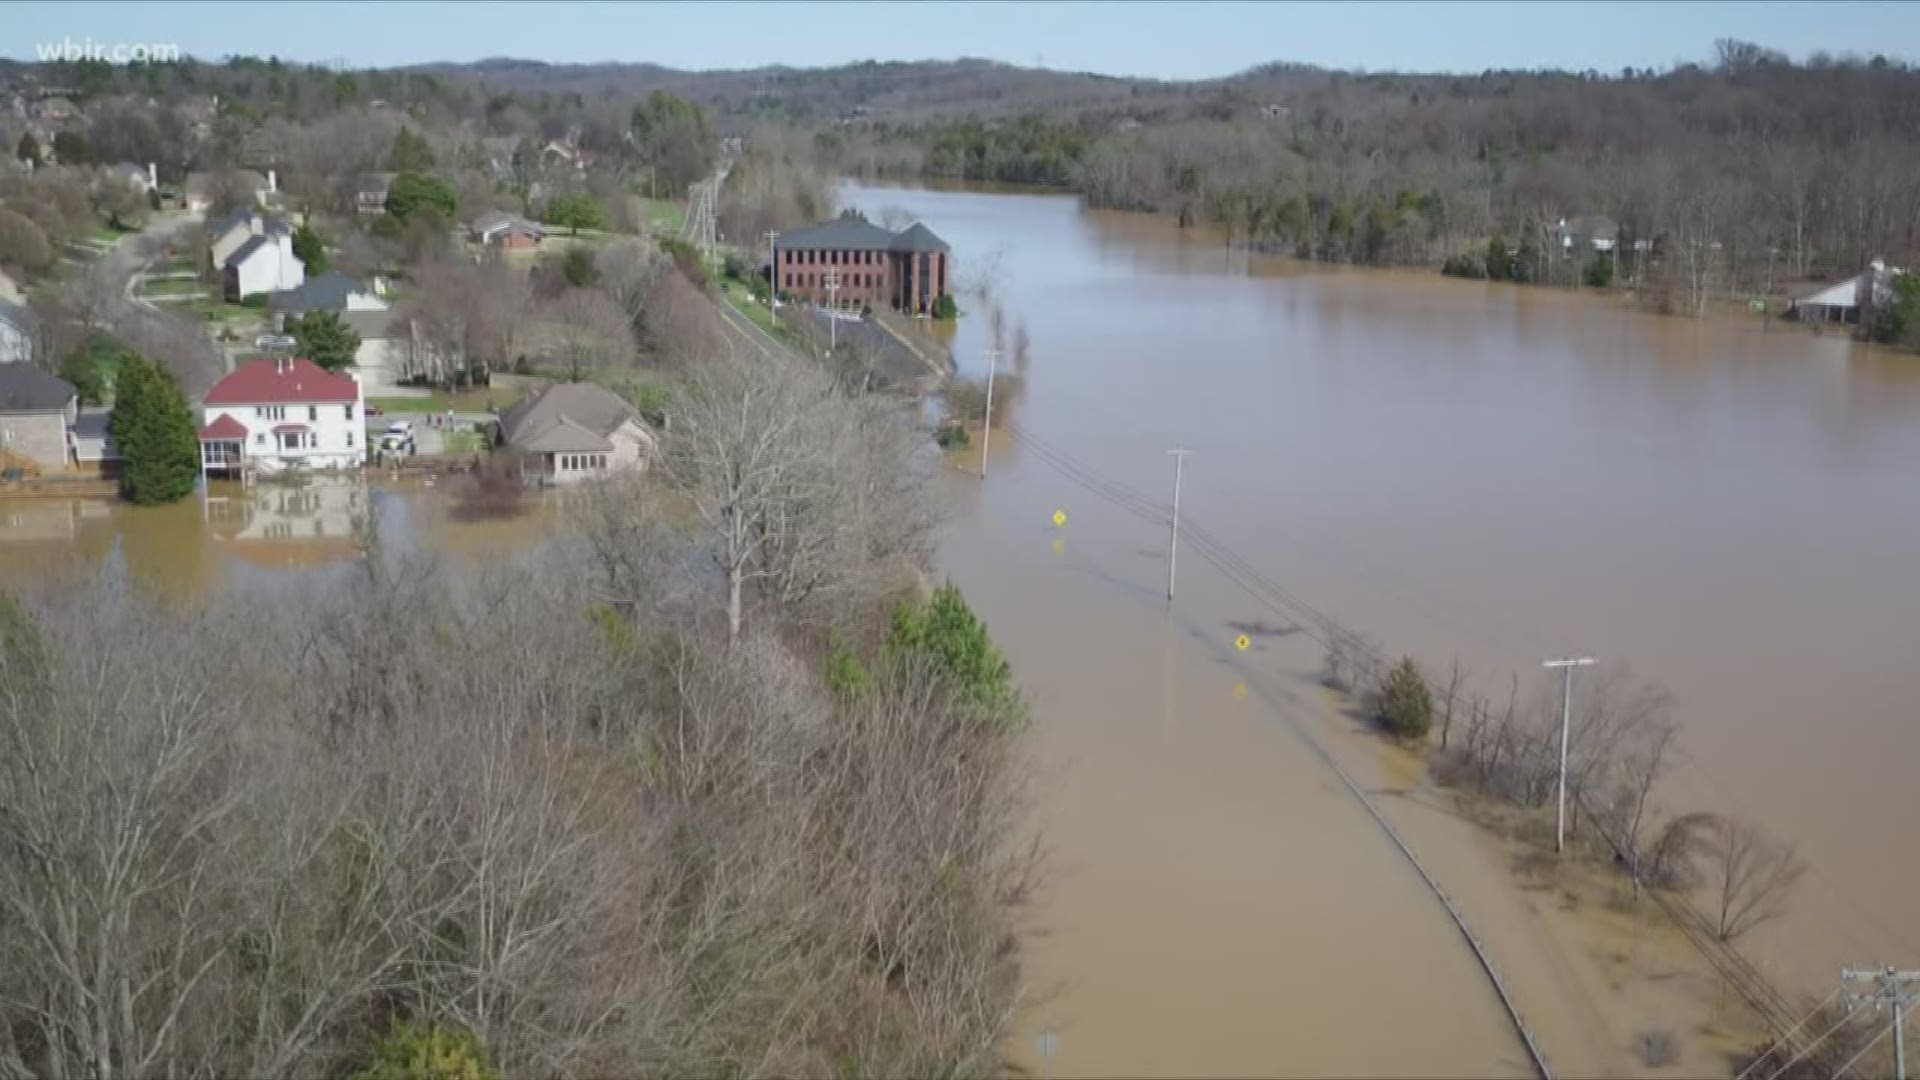 Just one year ago, flooding across East Tennessee turned some neighborhoods into islands.